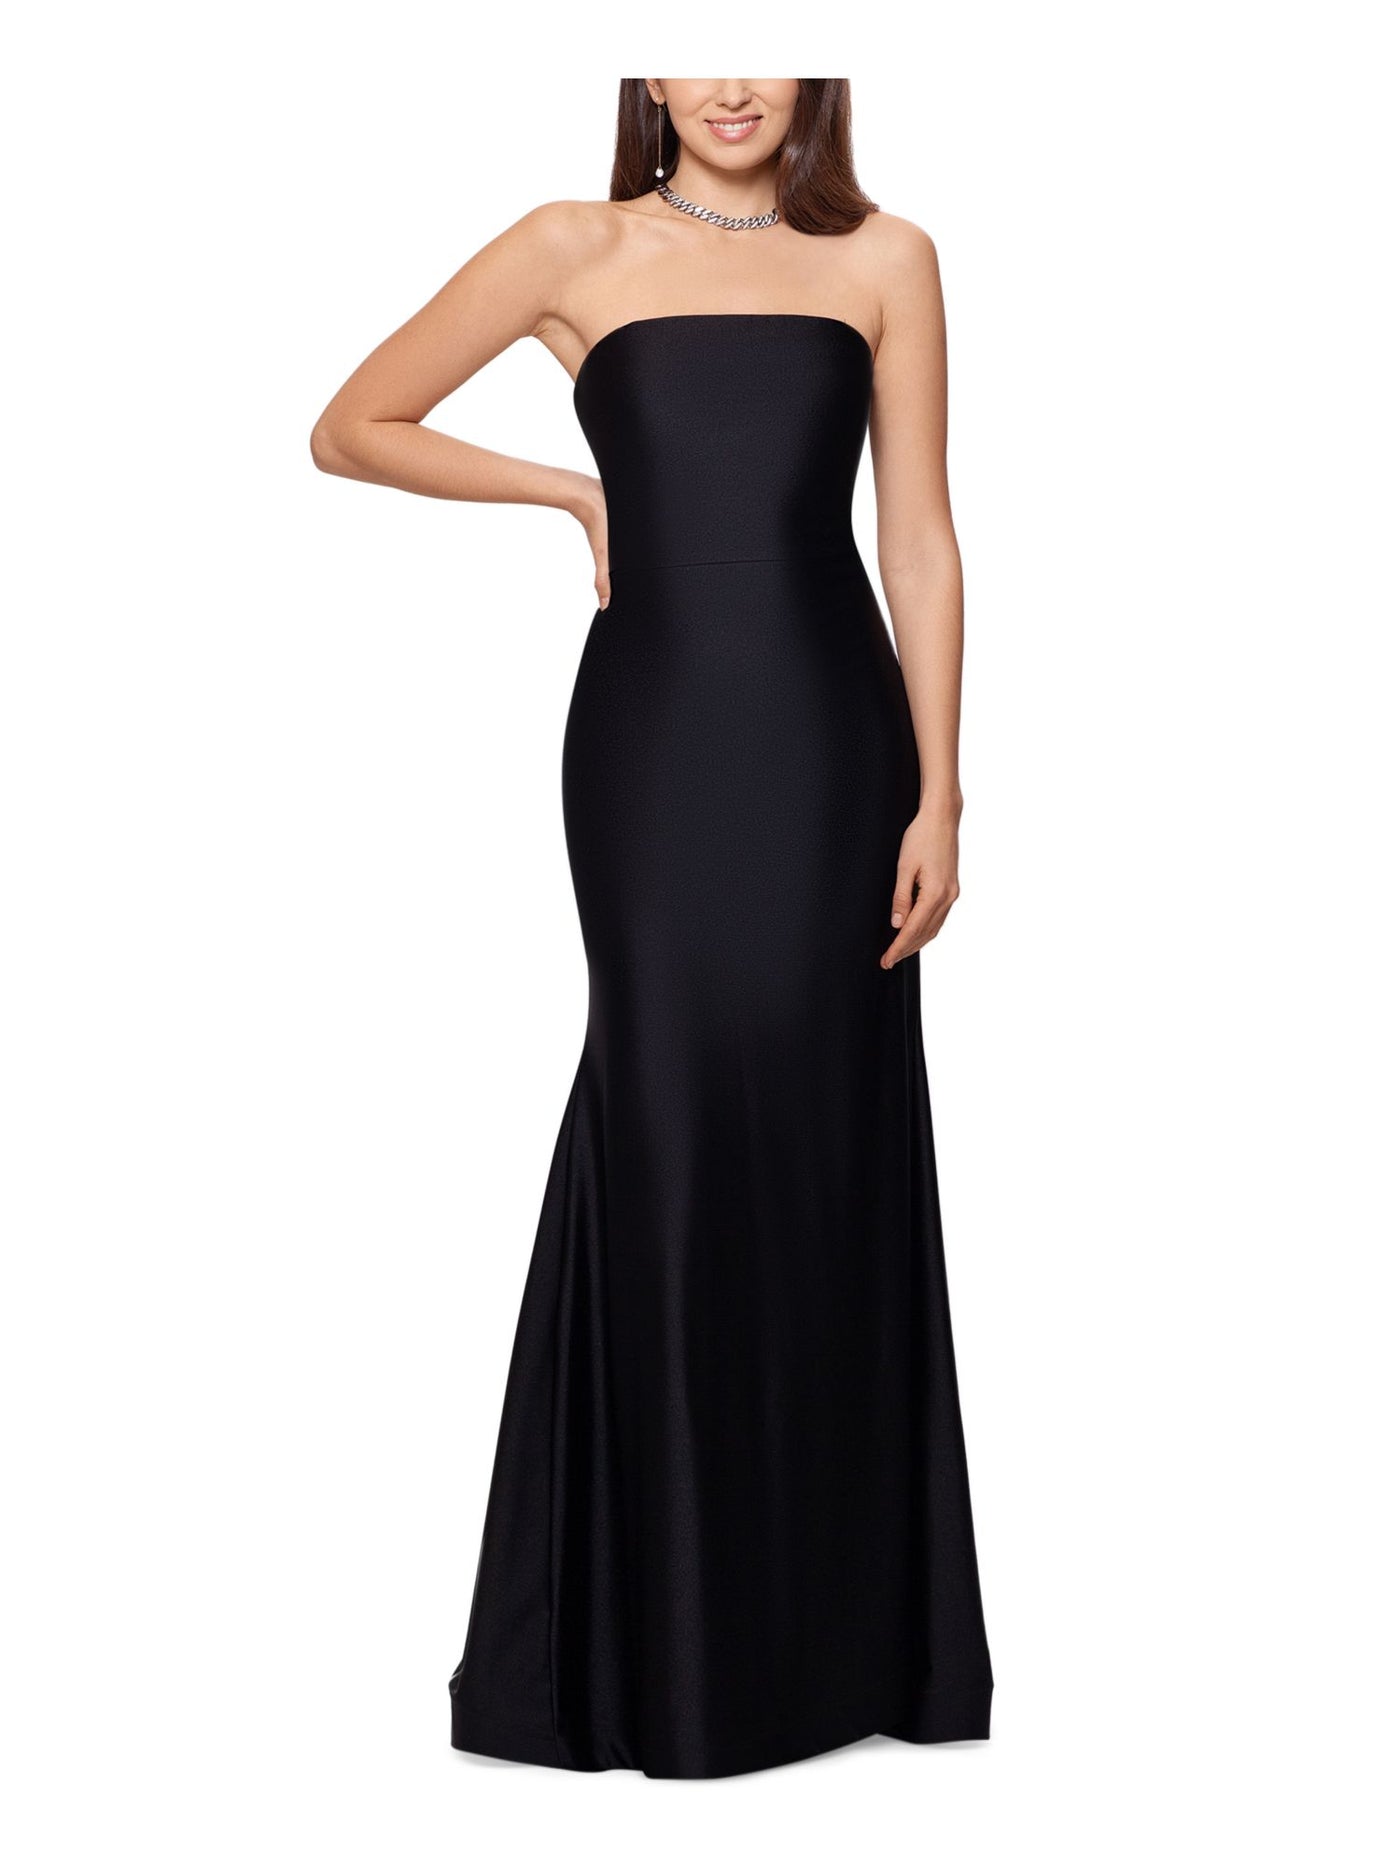 XSCAPE Womens Black Stretch Zippered Sateen Fabric Lined Sleeveless Strapless Full-Length Formal Gown Dress 6